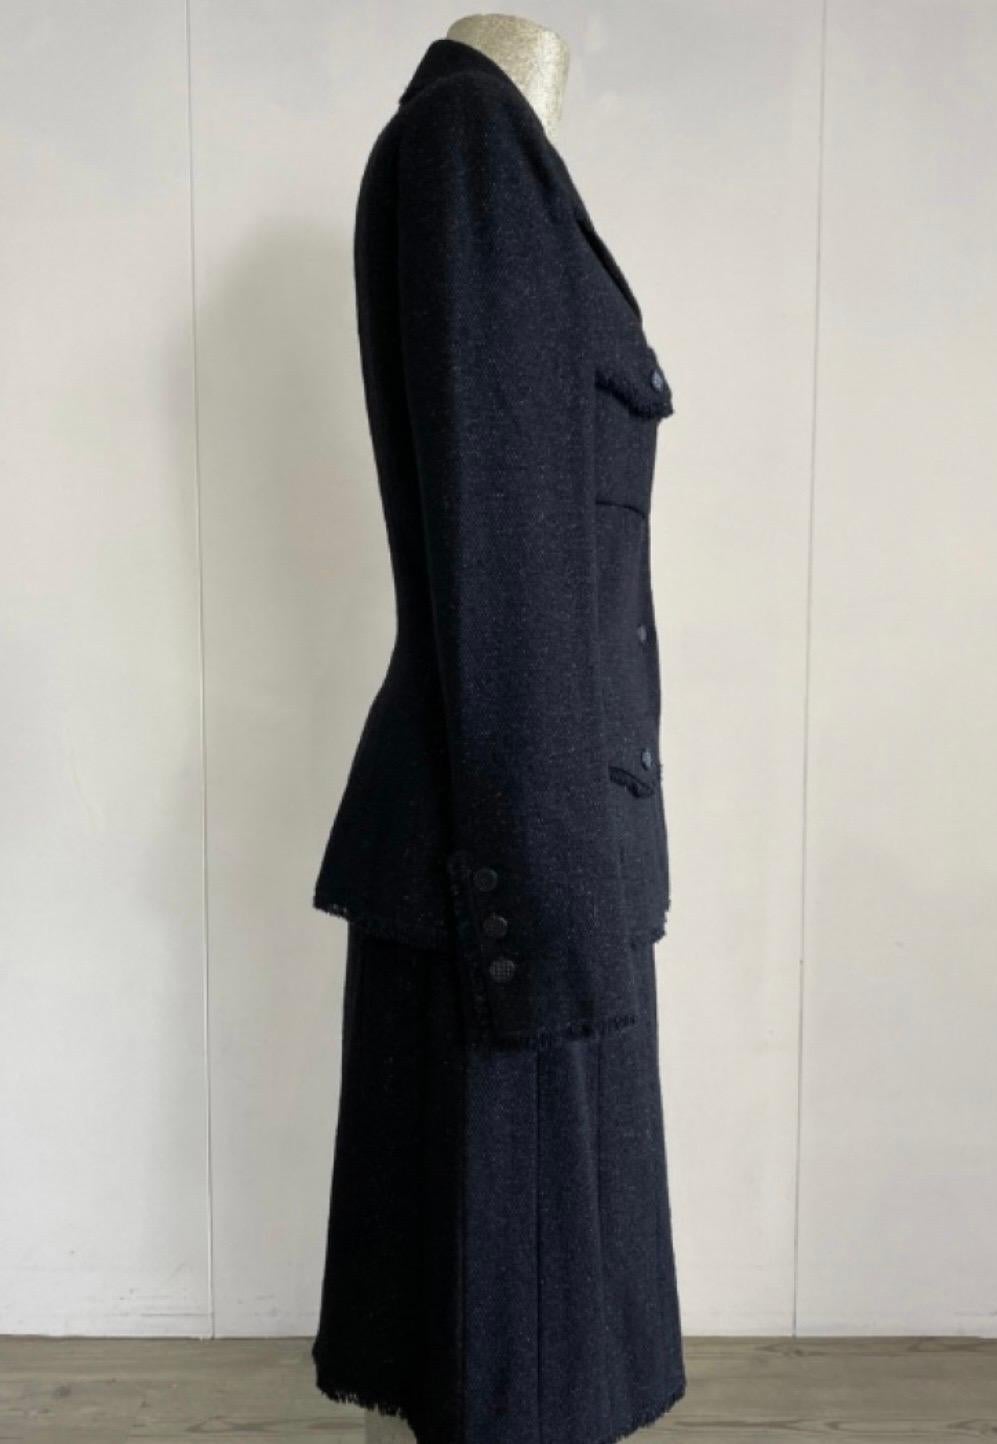 Chanel Suit, Jacket + skirt.
French size 36, therefore Italian 40.
In black wool but with a shiny twist.
jacket measurements: shoulder 42, sleeve 60cm, chest 40cm, length 60cm, skirt, 
Skirt measurements: waist 34cm, hips 45cm, length 55cm, in very